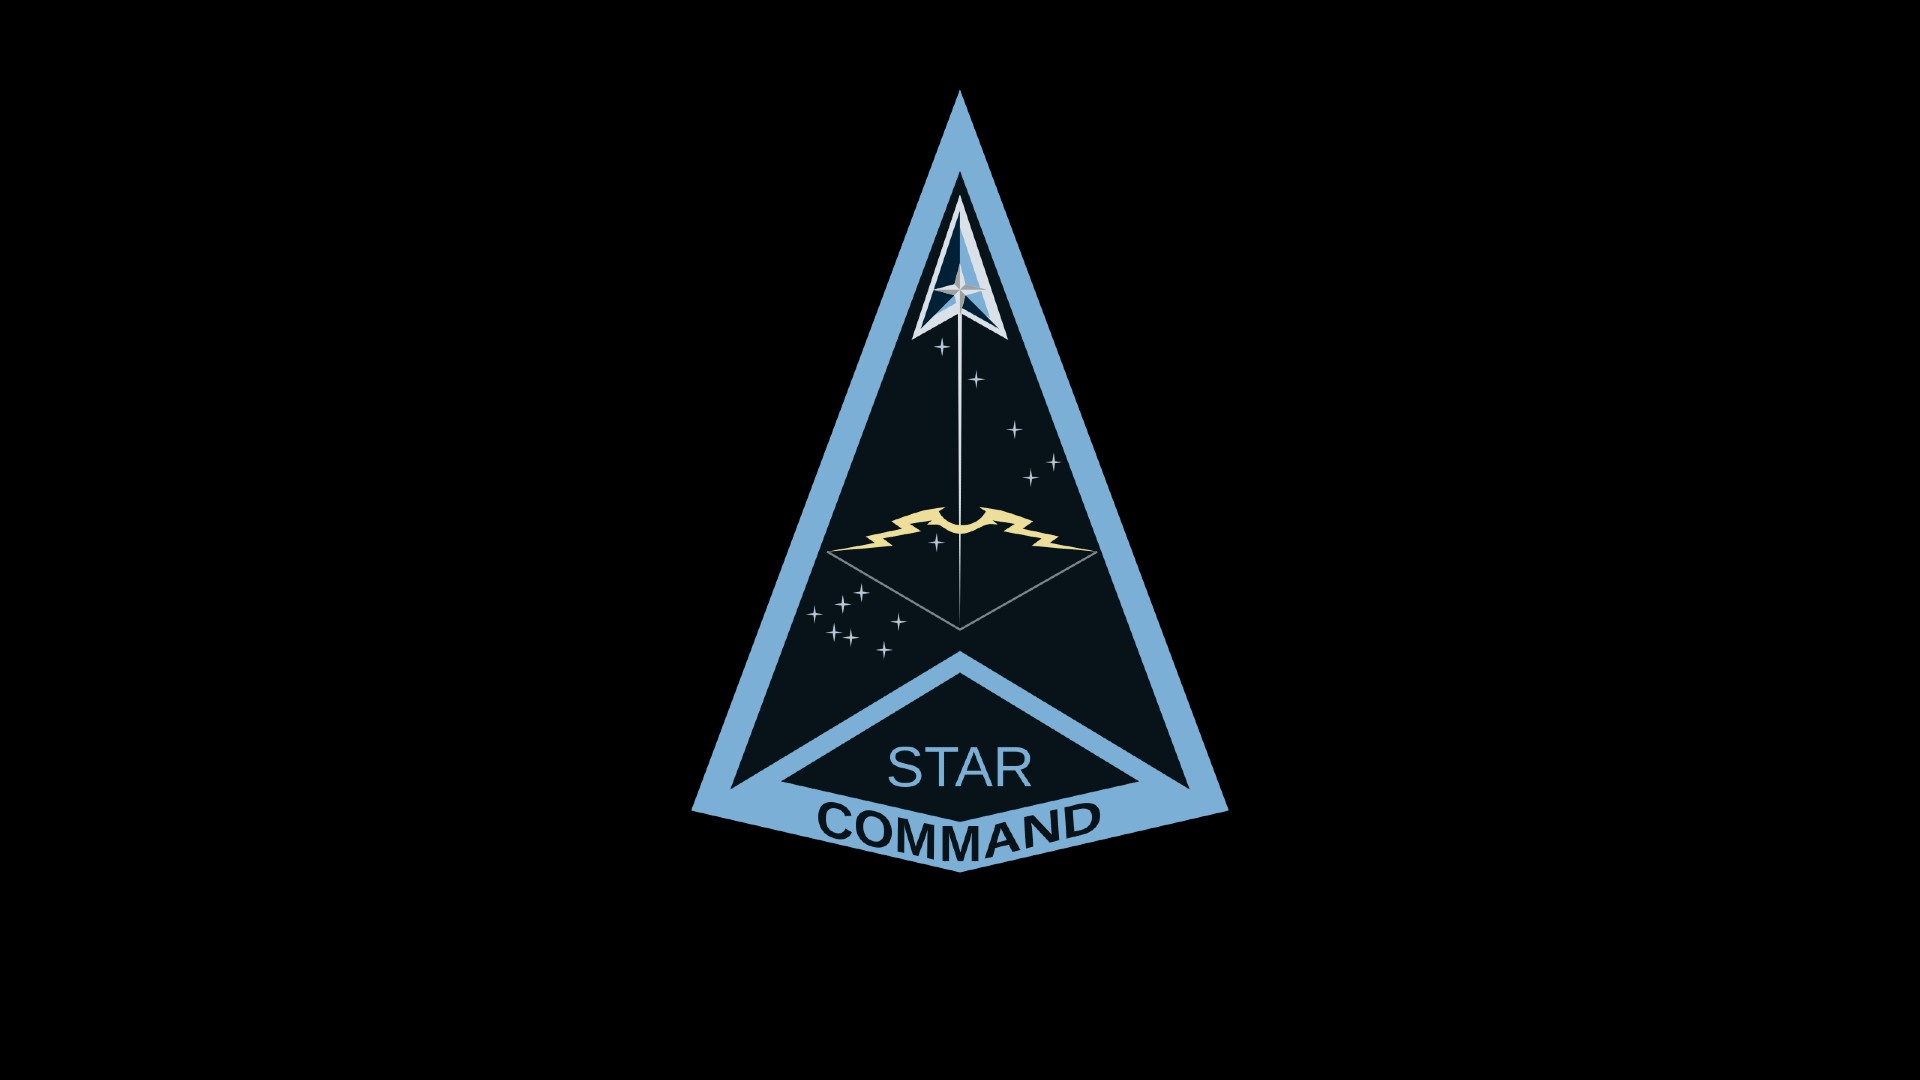 The official Space Training and Readiness Command emblem, which depicts a delta-shaped spacecraft lifting off in front of a field of stars.